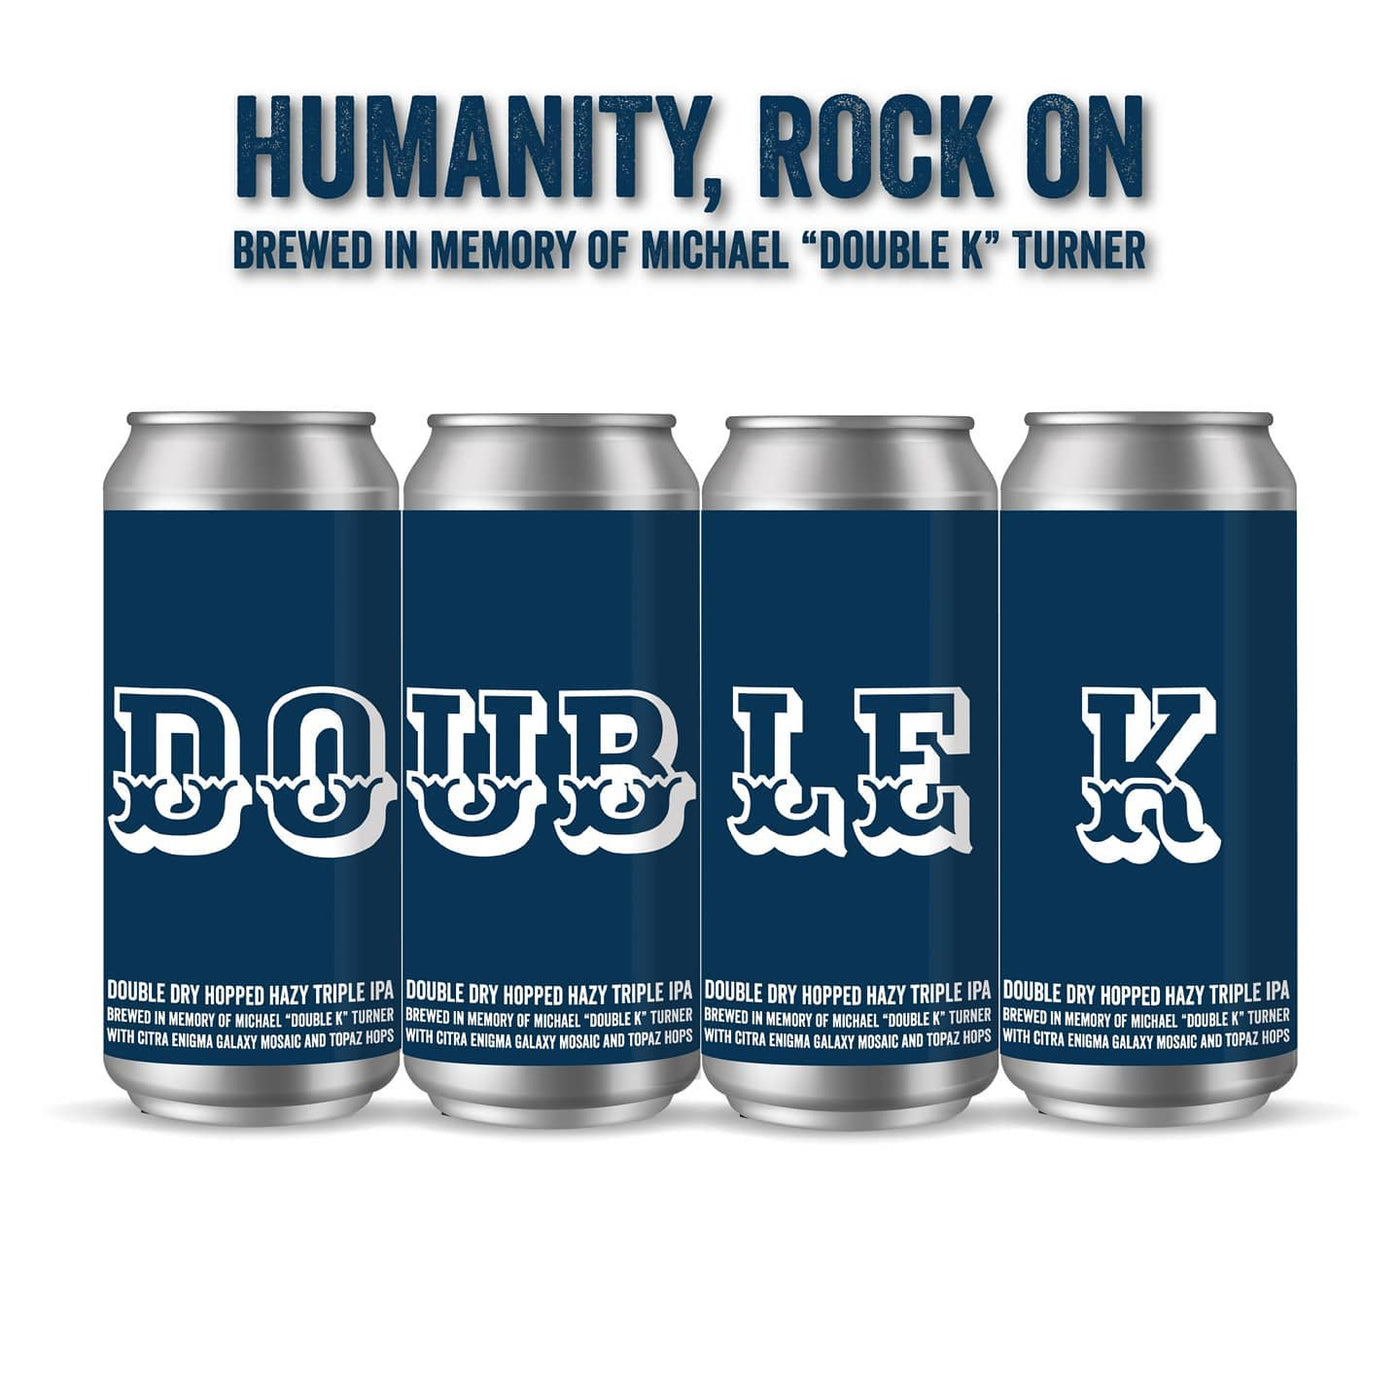 New World Ales - Humanity, Rock on "Limit 1 Four Pack"